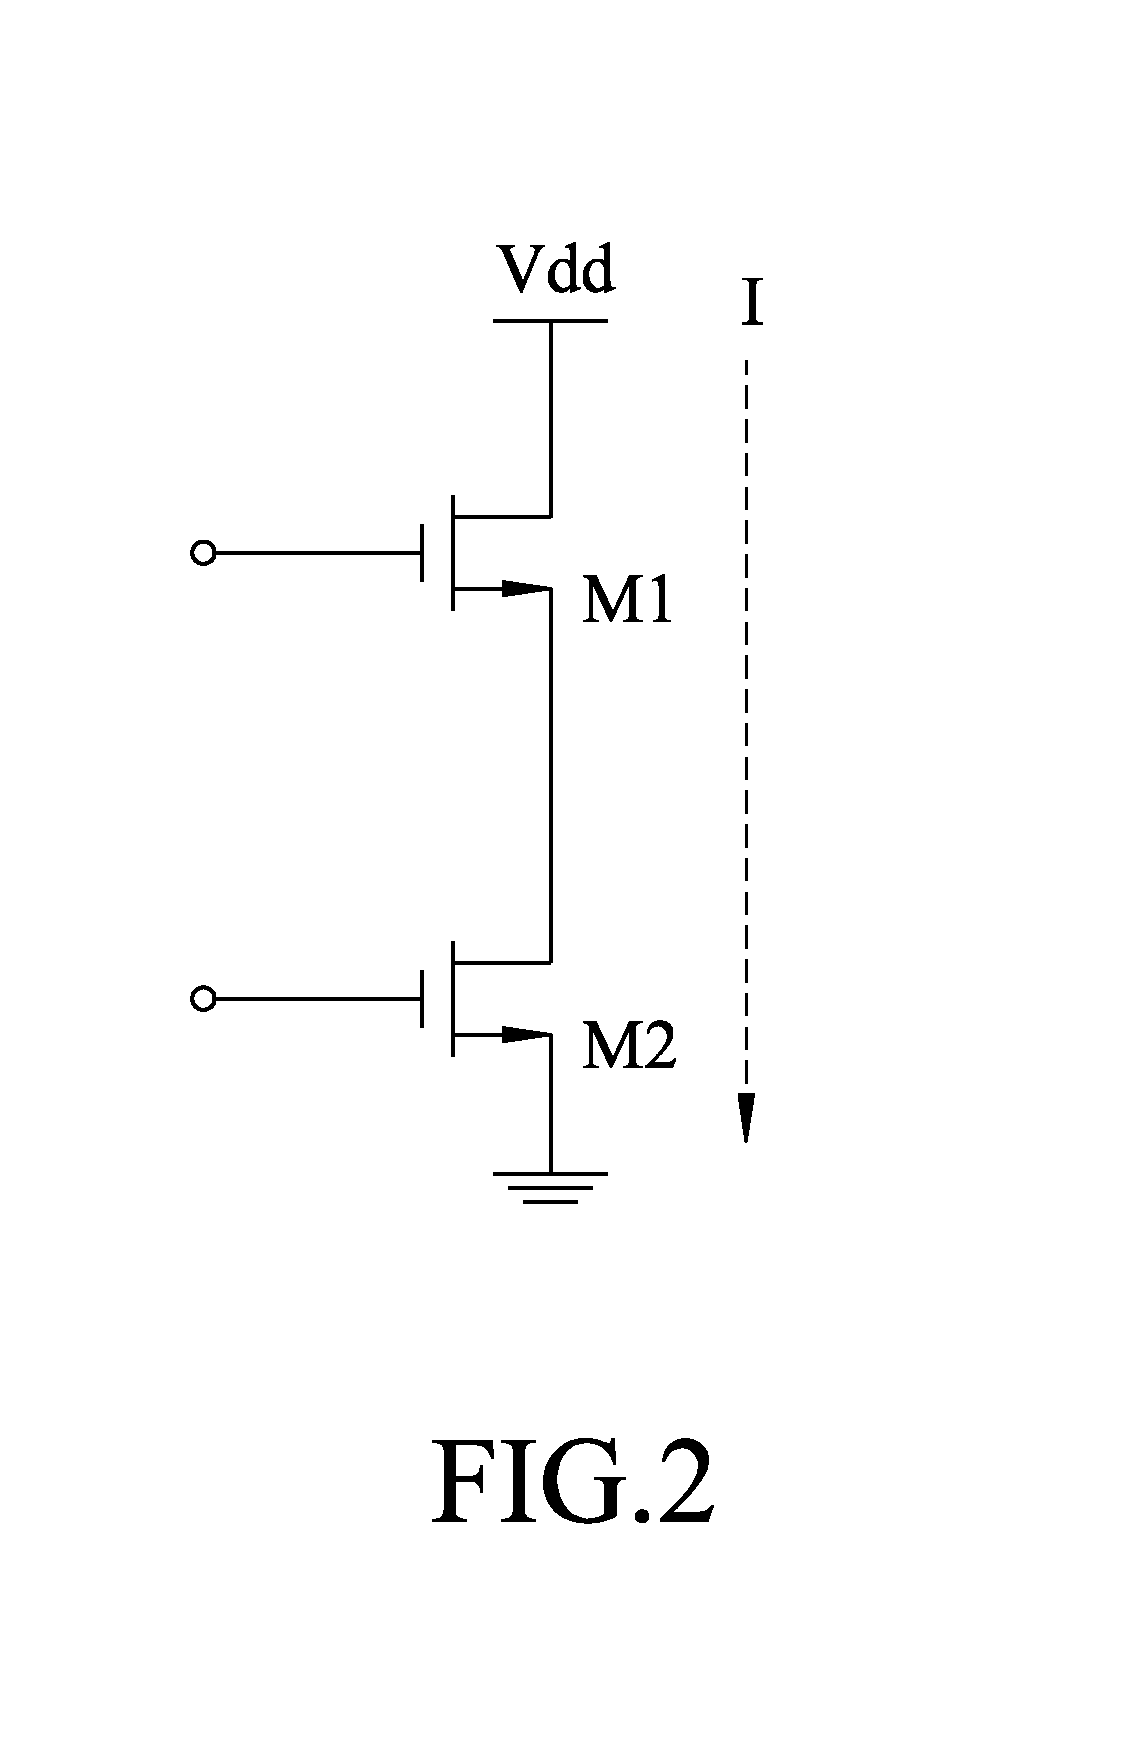 Ultra-wideband low-noise amplifier circuit with low power consumption